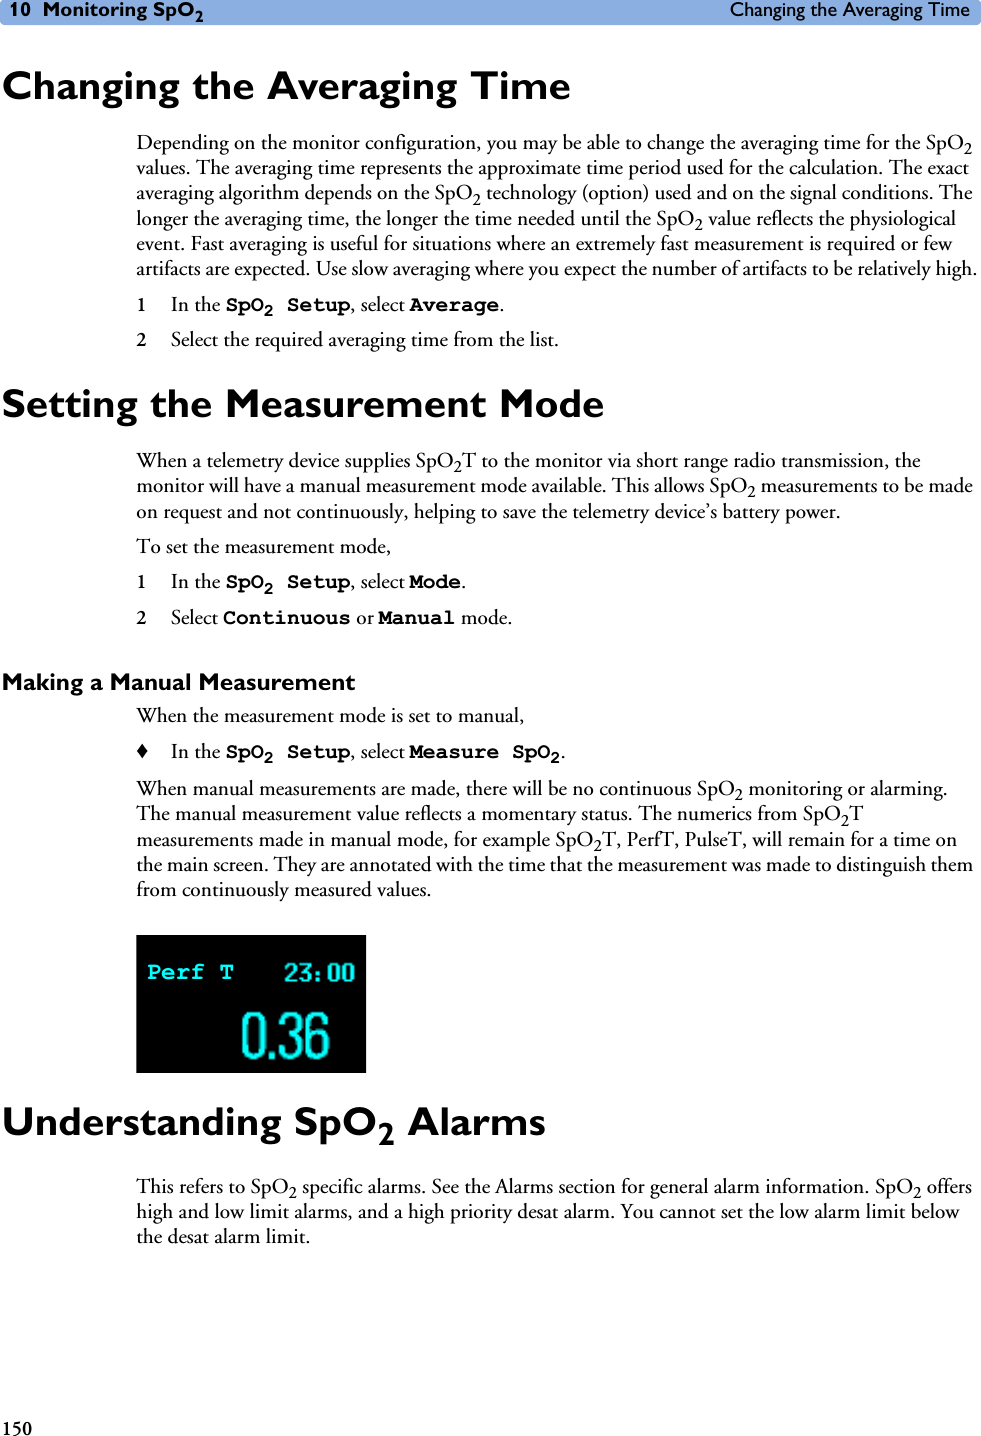 10 Monitoring SpO2Changing the Averaging Time150Changing the Averaging TimeDepending on the monitor configuration, you may be able to change the averaging time for the SpO2 values. The averaging time represents the approximate time period used for the calculation. The exact averaging algorithm depends on the SpO2 technology (option) used and on the signal conditions. The longer the averaging time, the longer the time needed until the SpO2 value reflects the physiological event. Fast averaging is useful for situations where an extremely fast measurement is required or few artifacts are expected. Use slow averaging where you expect the number of artifacts to be relatively high.1In the SpO2 Setup, select Average.2Select the required averaging time from the list. Setting the Measurement ModeWhen a telemetry device supplies SpO2T to the monitor via short range radio transmission, the monitor will have a manual measurement mode available. This allows SpO2 measurements to be made on request and not continuously, helping to save the telemetry device’s battery power. To set the measurement mode, 1In the SpO2 Setup, select Mode.2Select Continuous or Manual mode.Making a Manual MeasurementWhen the measurement mode is set to manual, ♦In the SpO2 Setup, select Measure SpO2.When manual measurements are made, there will be no continuous SpO2 monitoring or alarming. The manual measurement value reflects a momentary status. The numerics from SpO2T measurements made in manual mode, for example SpO2T, PerfT, PulseT, will remain for a time on the main screen. They are annotated with the time that the measurement was made to distinguish them from continuously measured values. Understanding SpO2 AlarmsThis refers to SpO2 specific alarms. See the Alarms section for general alarm information. SpO2 offers high and low limit alarms, and a high priority desat alarm. You cannot set the low alarm limit below the desat alarm limit.Perf T